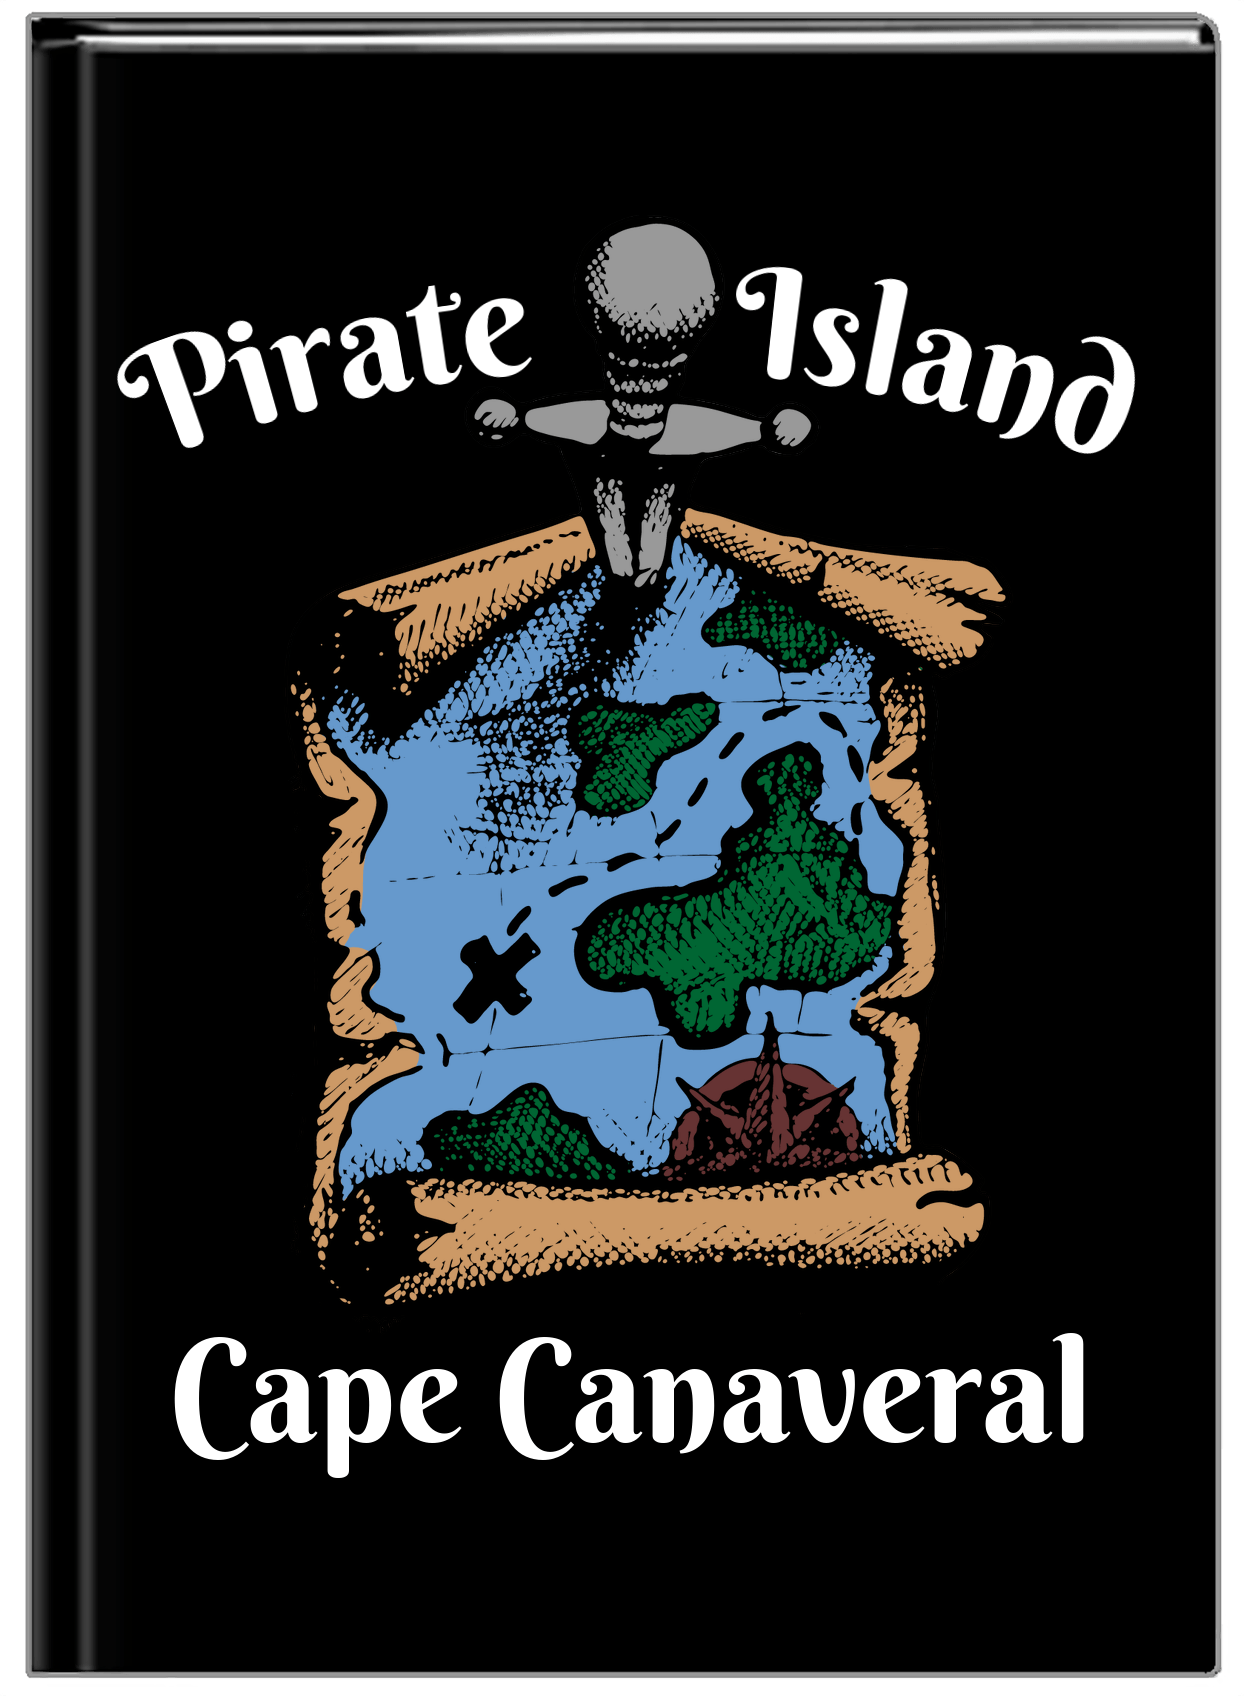 Personalized Pirates Journal - Pirate Island - Front View